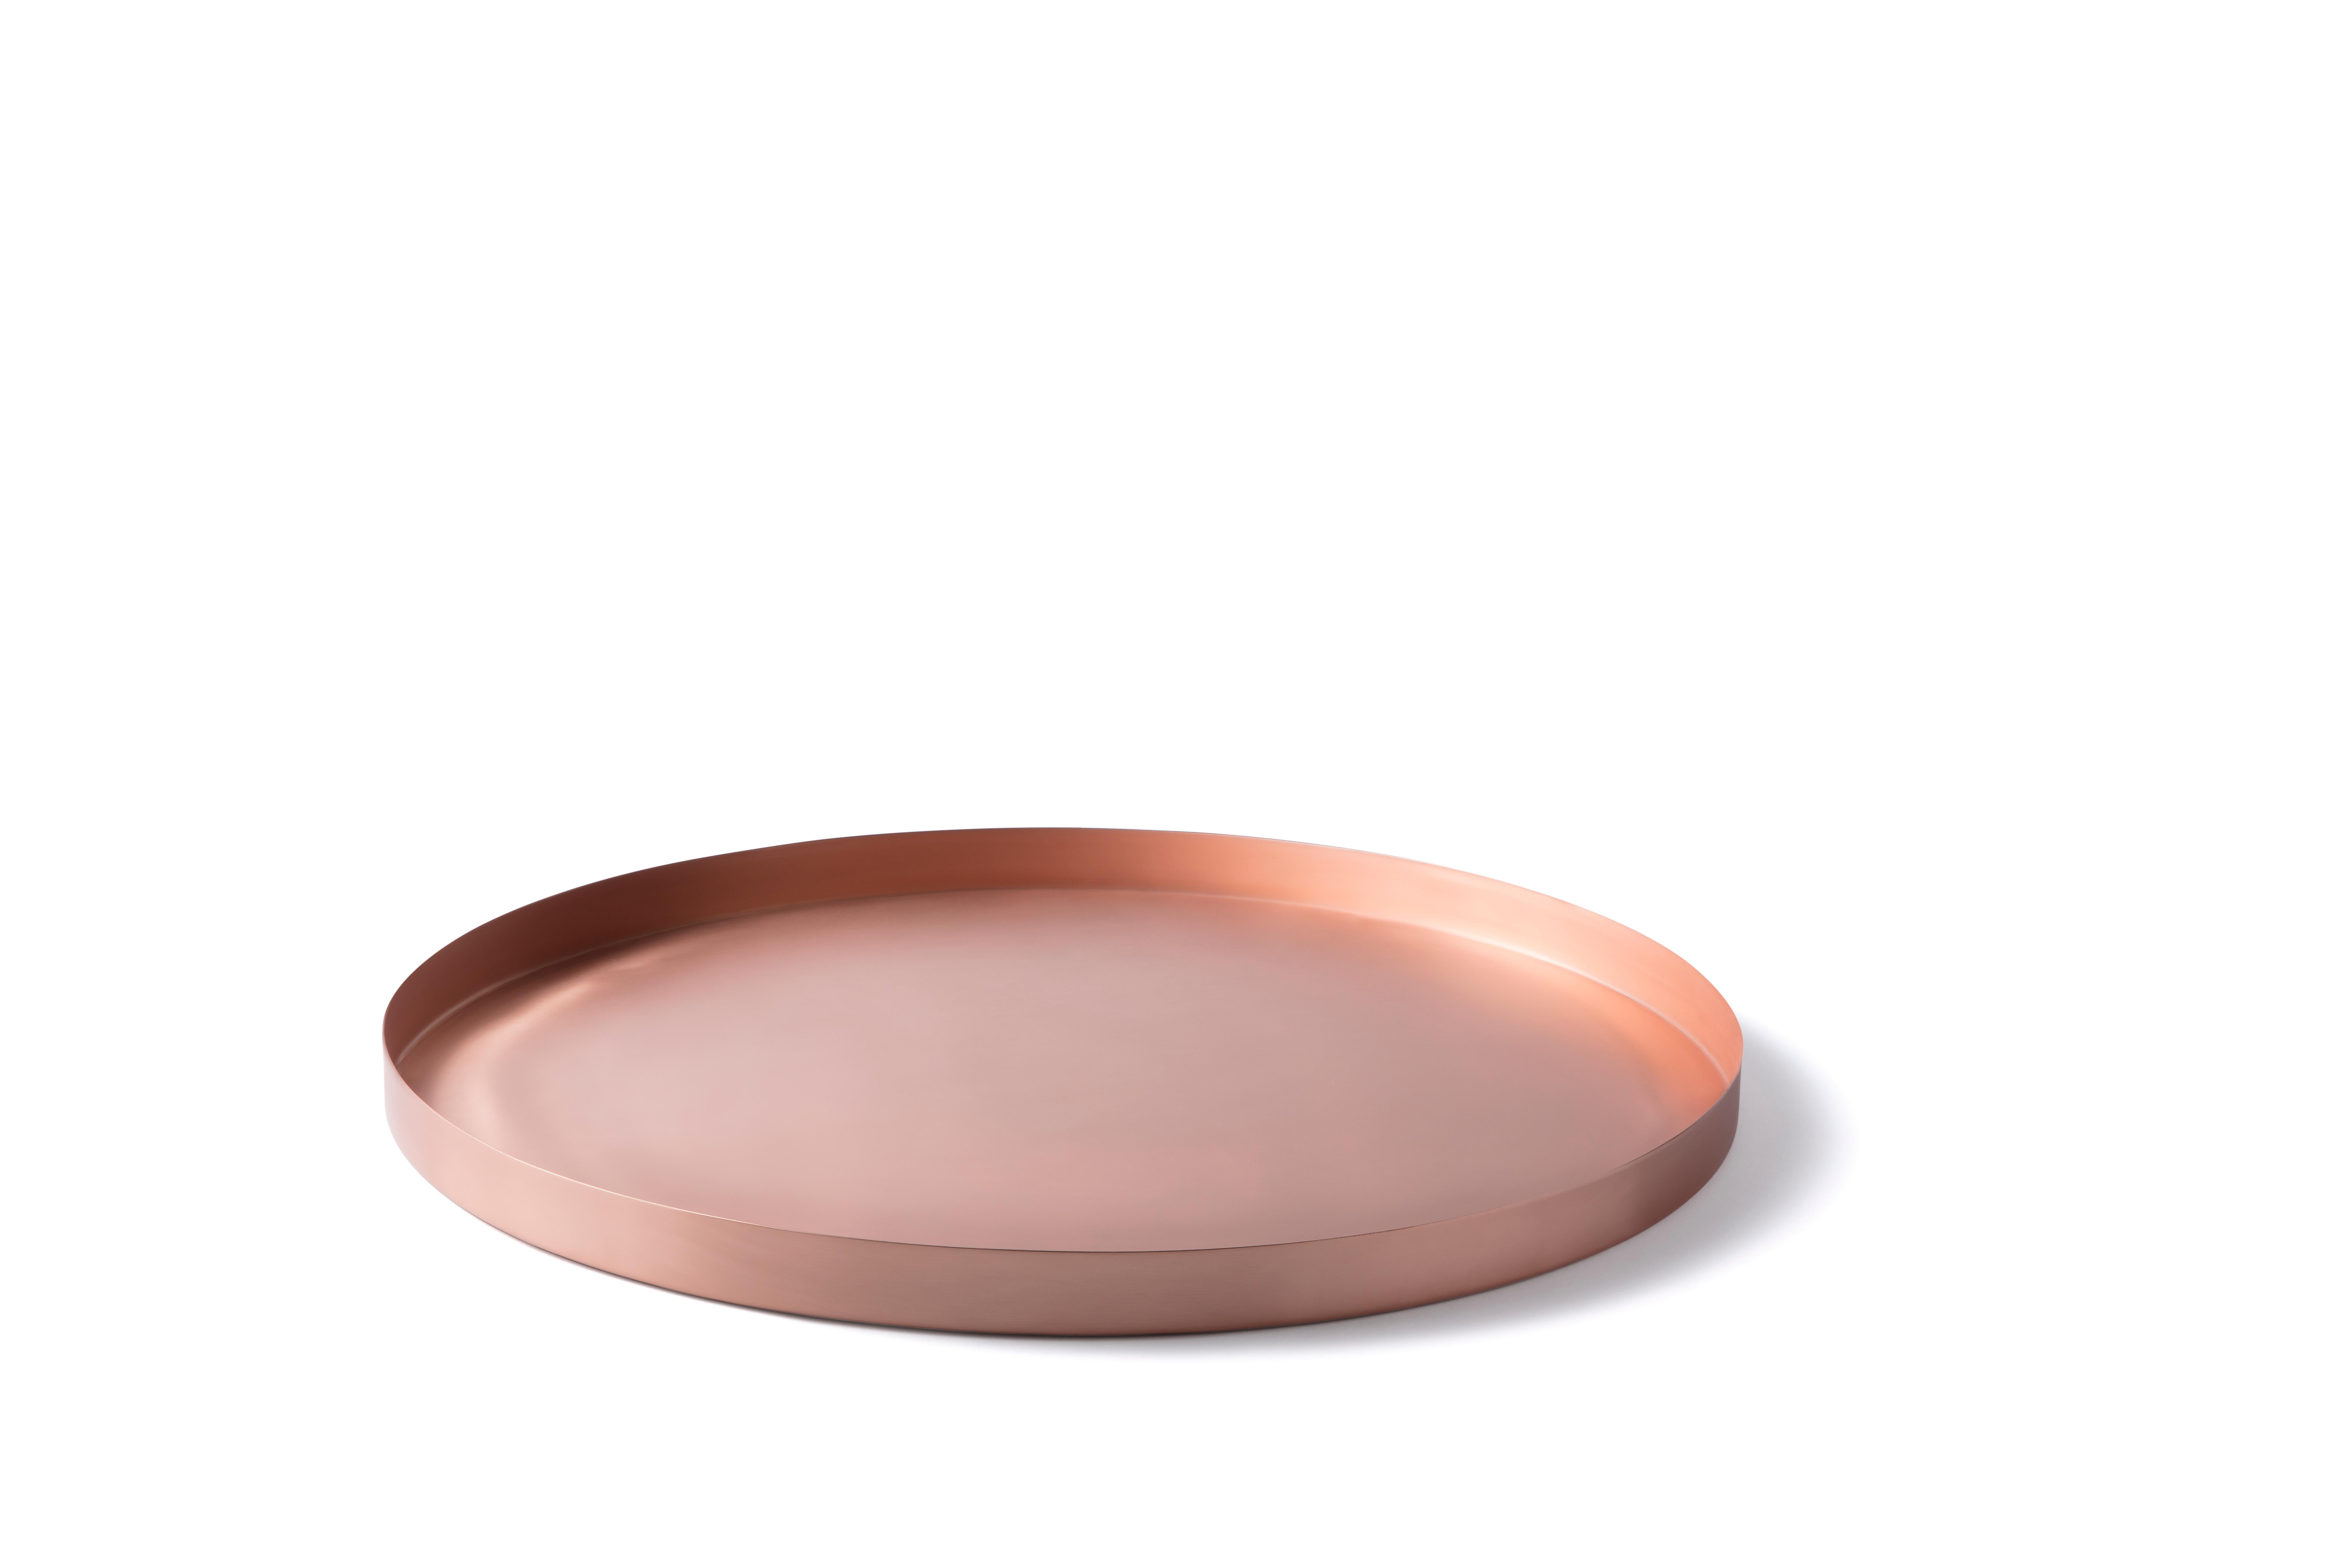 Full Moon is a large circular copper tray and it is part of the Lunar Landscape collection designed by Elisa Ossino, who conceived for Paola C. a tableware collection, revisiting the classic themes of mise en place and the figurative influences